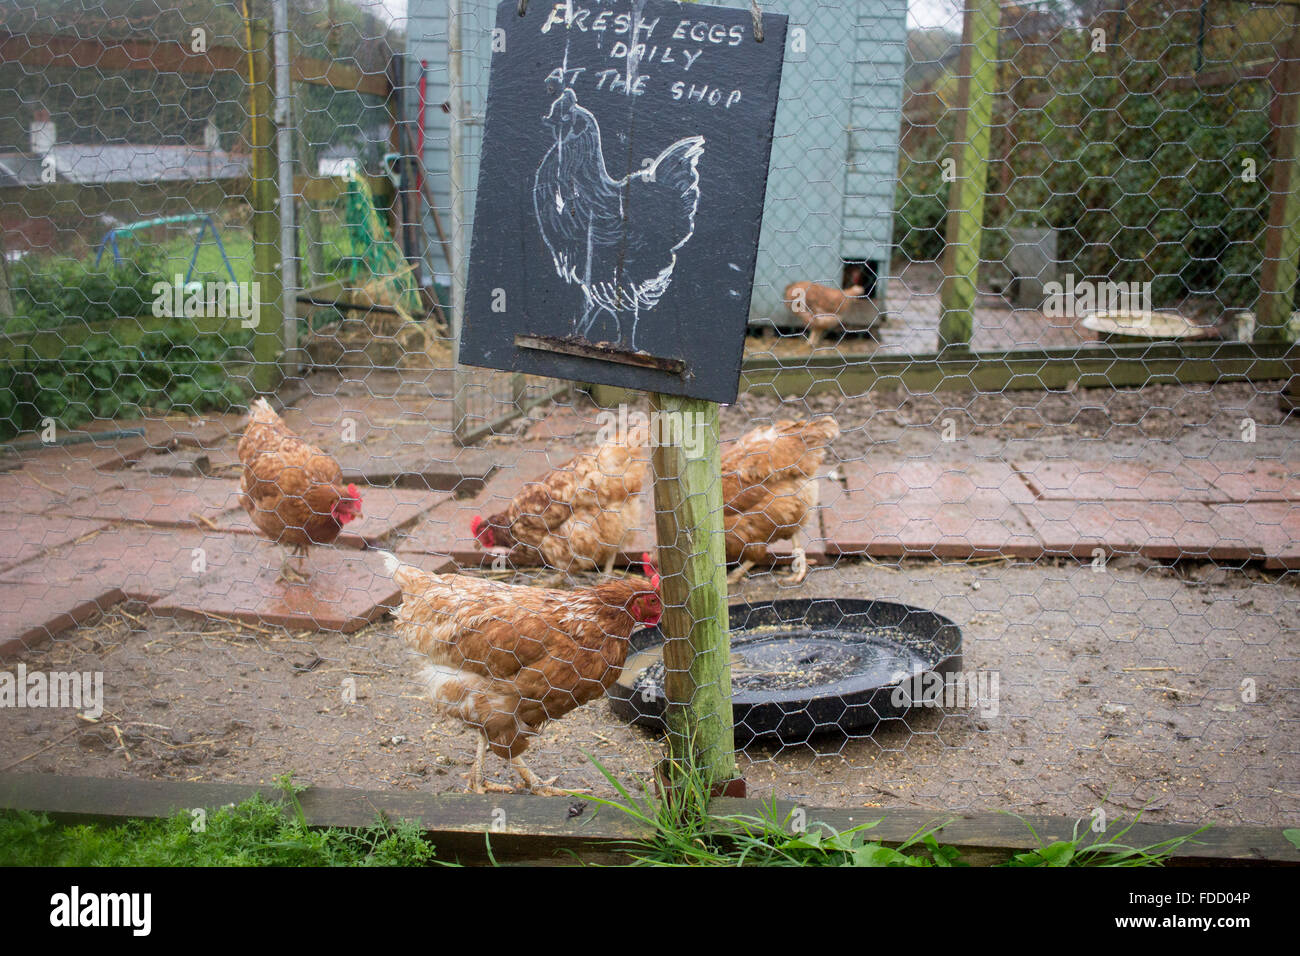 Hens in a coop at Polgoon orchards, Stock Photo